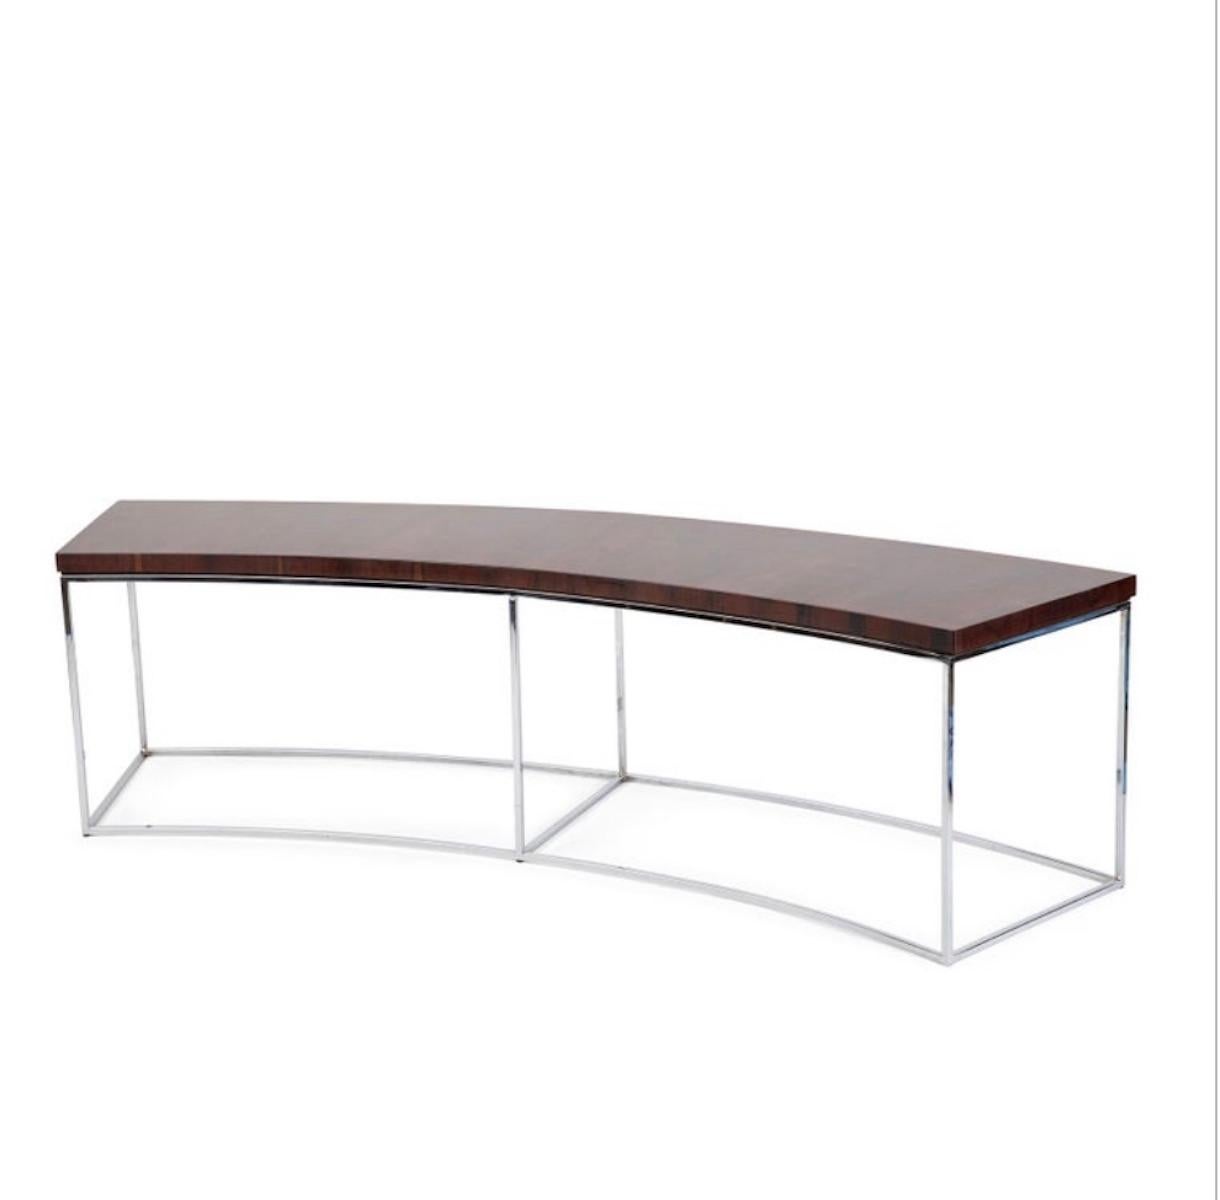  Brazilian rosewood and chrome Milo Baughman for Thayer Coggin sofa table circa late 1960s. This example has an incredibly grained rosewood top and mirror polished chrome base. It has been newly finished. 